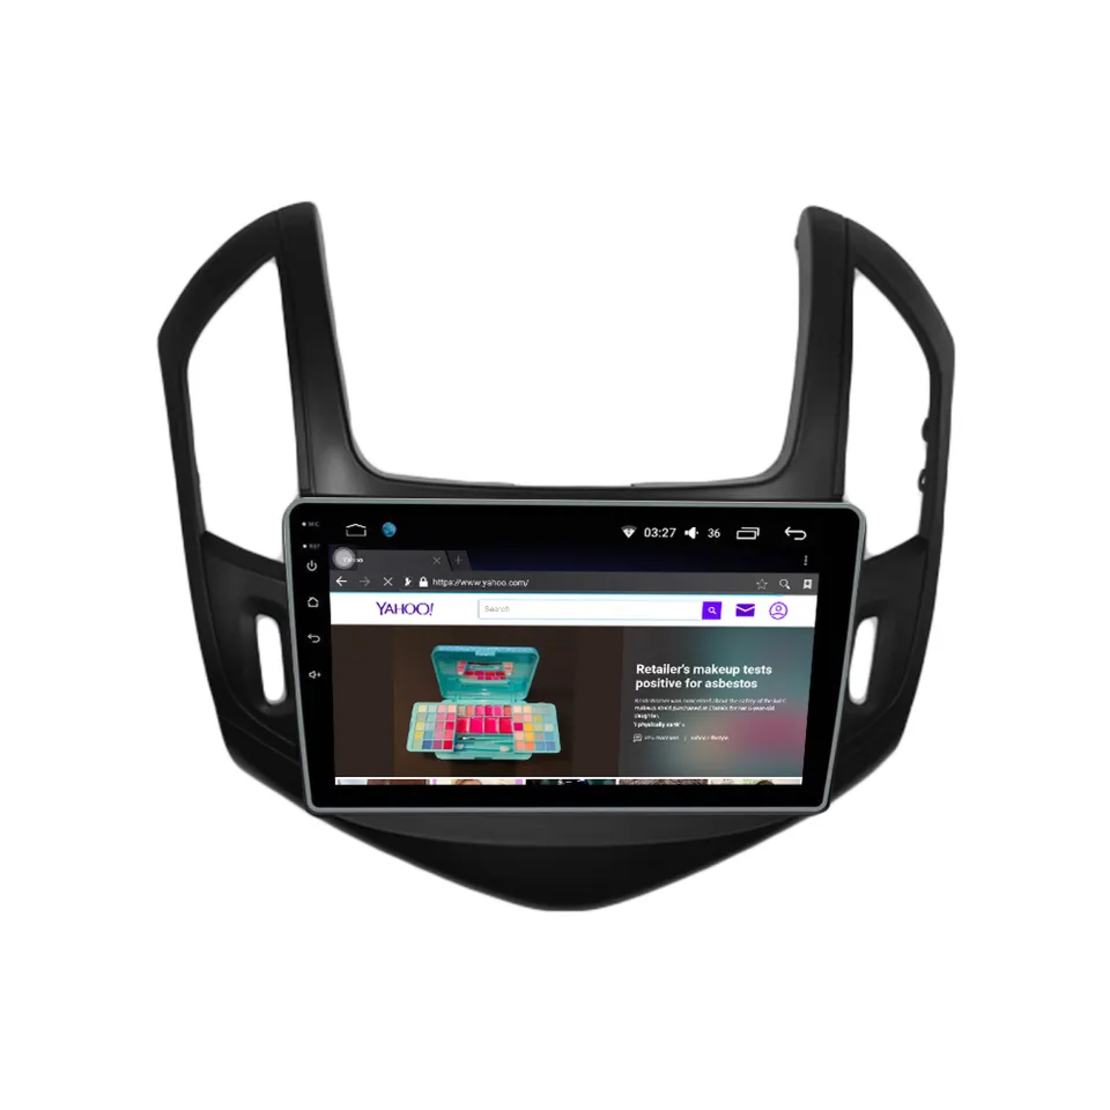 Chevrolet Cruze 2008-2015 Android Multimedia/Navigation